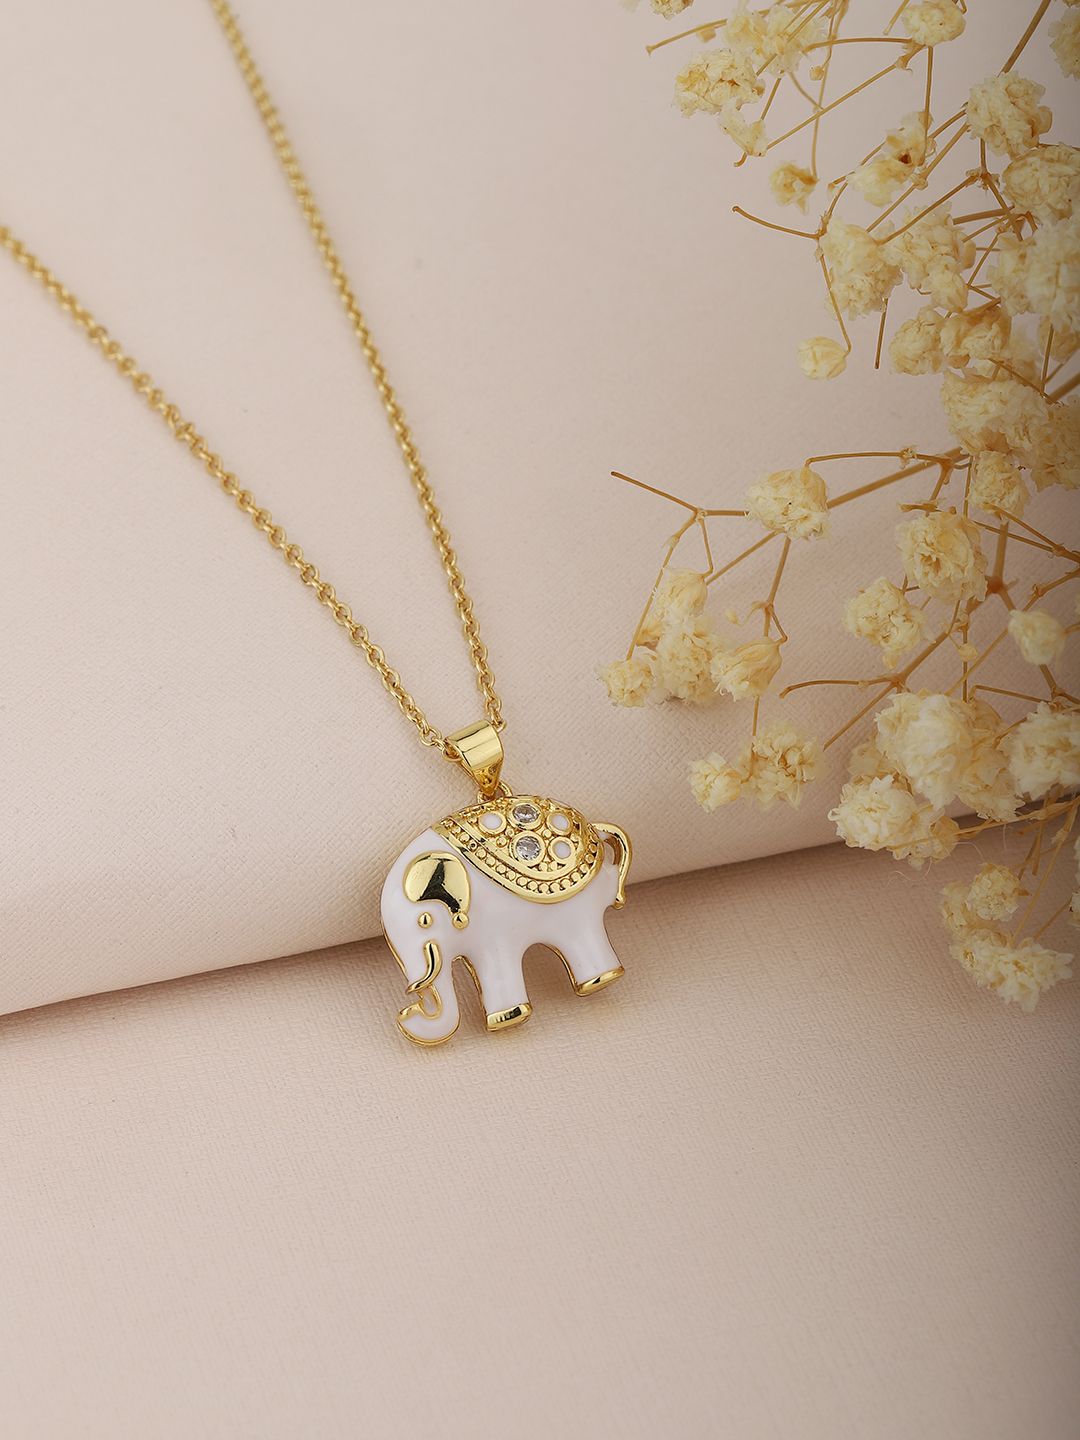 Carlton London White & Gold-Toned Brass Elephant Shaped Necklace Price in India